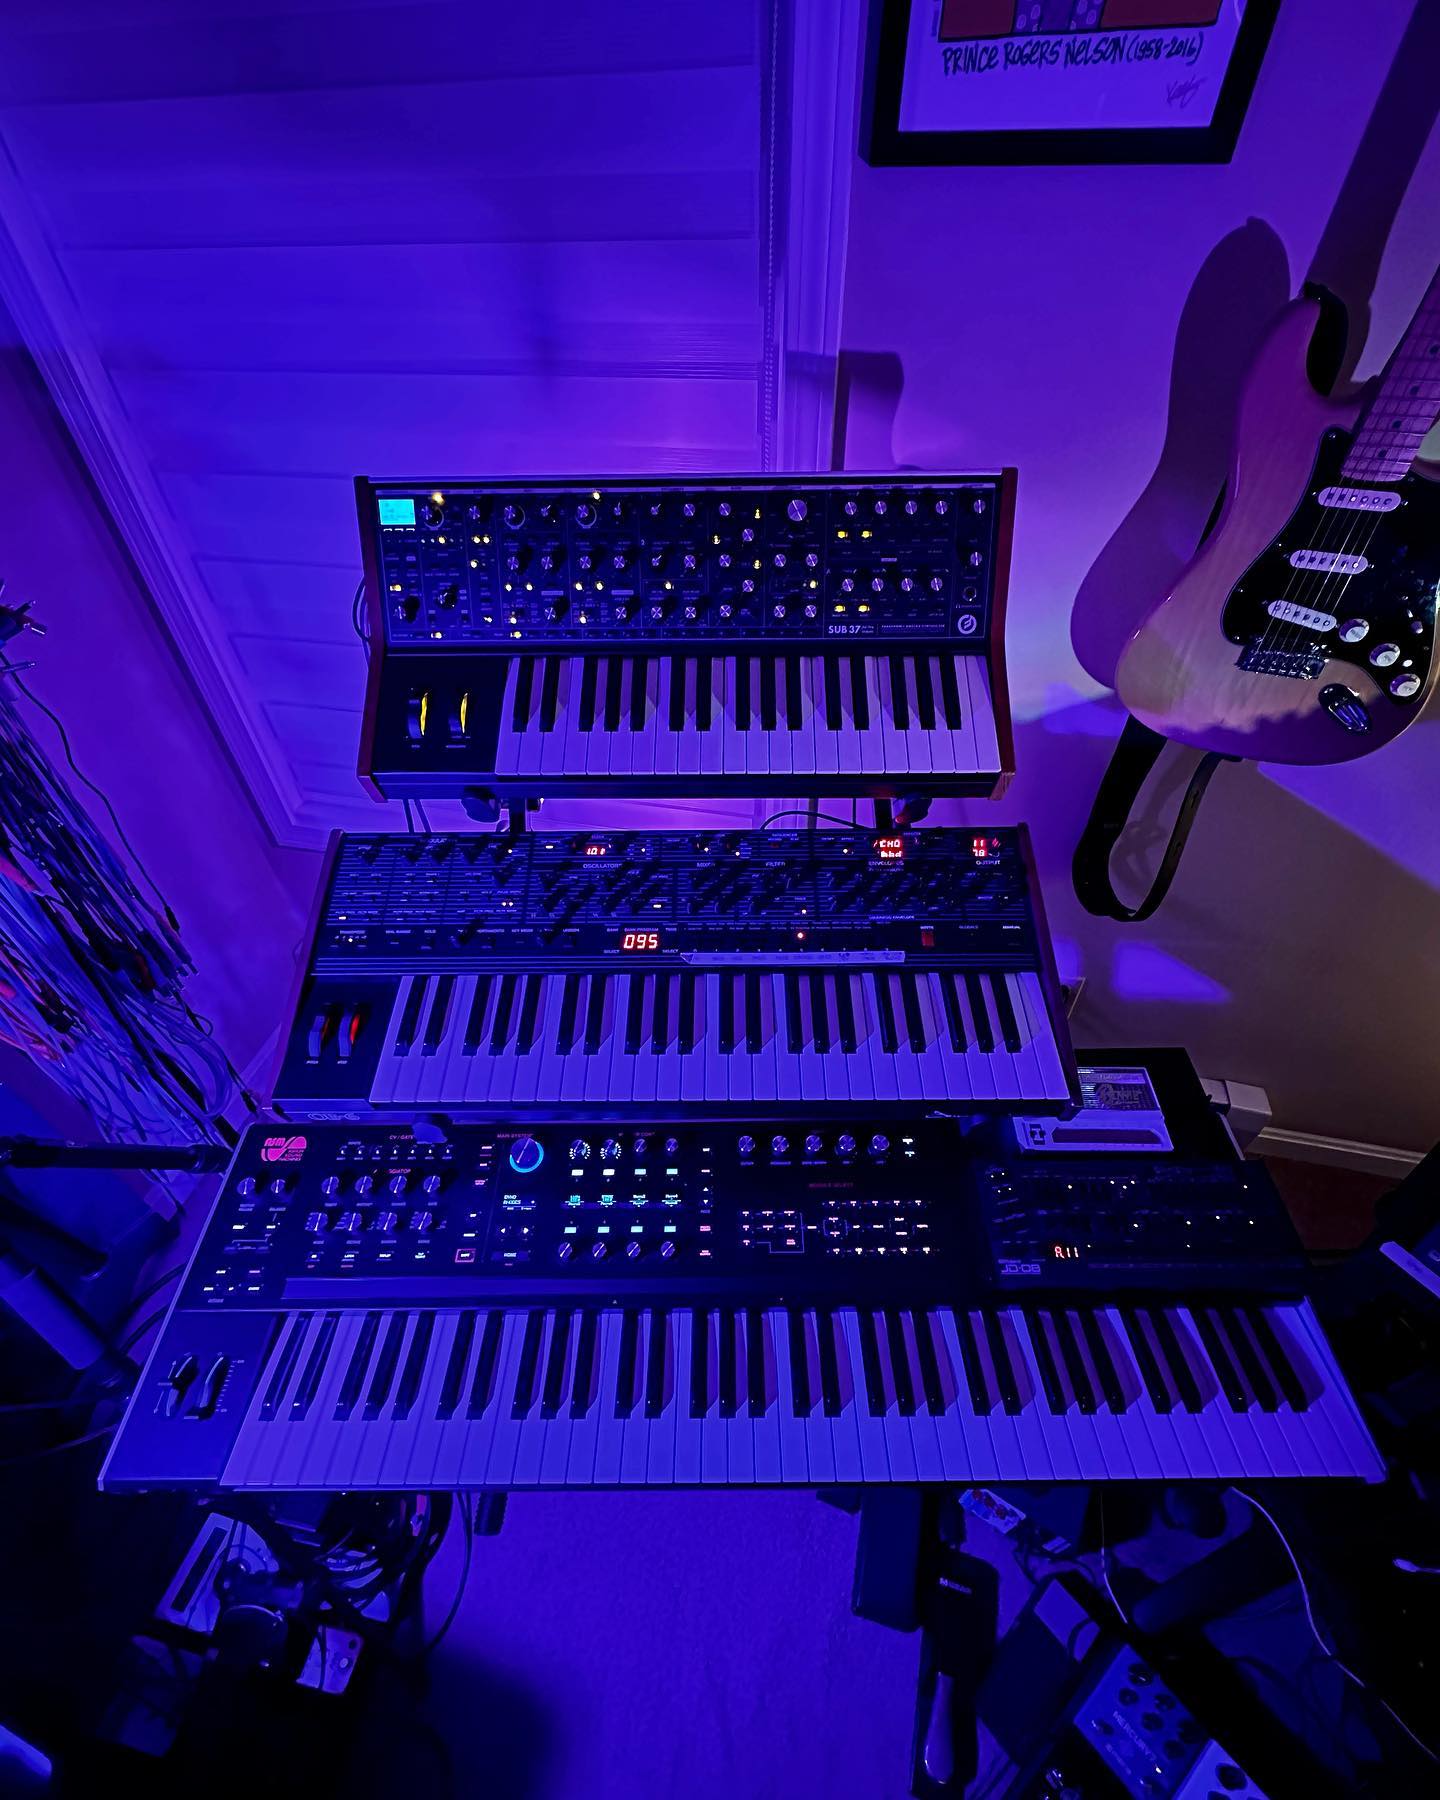 They say blue light is bad for sleep, but I'd rather count synths than sheep. #jd-08